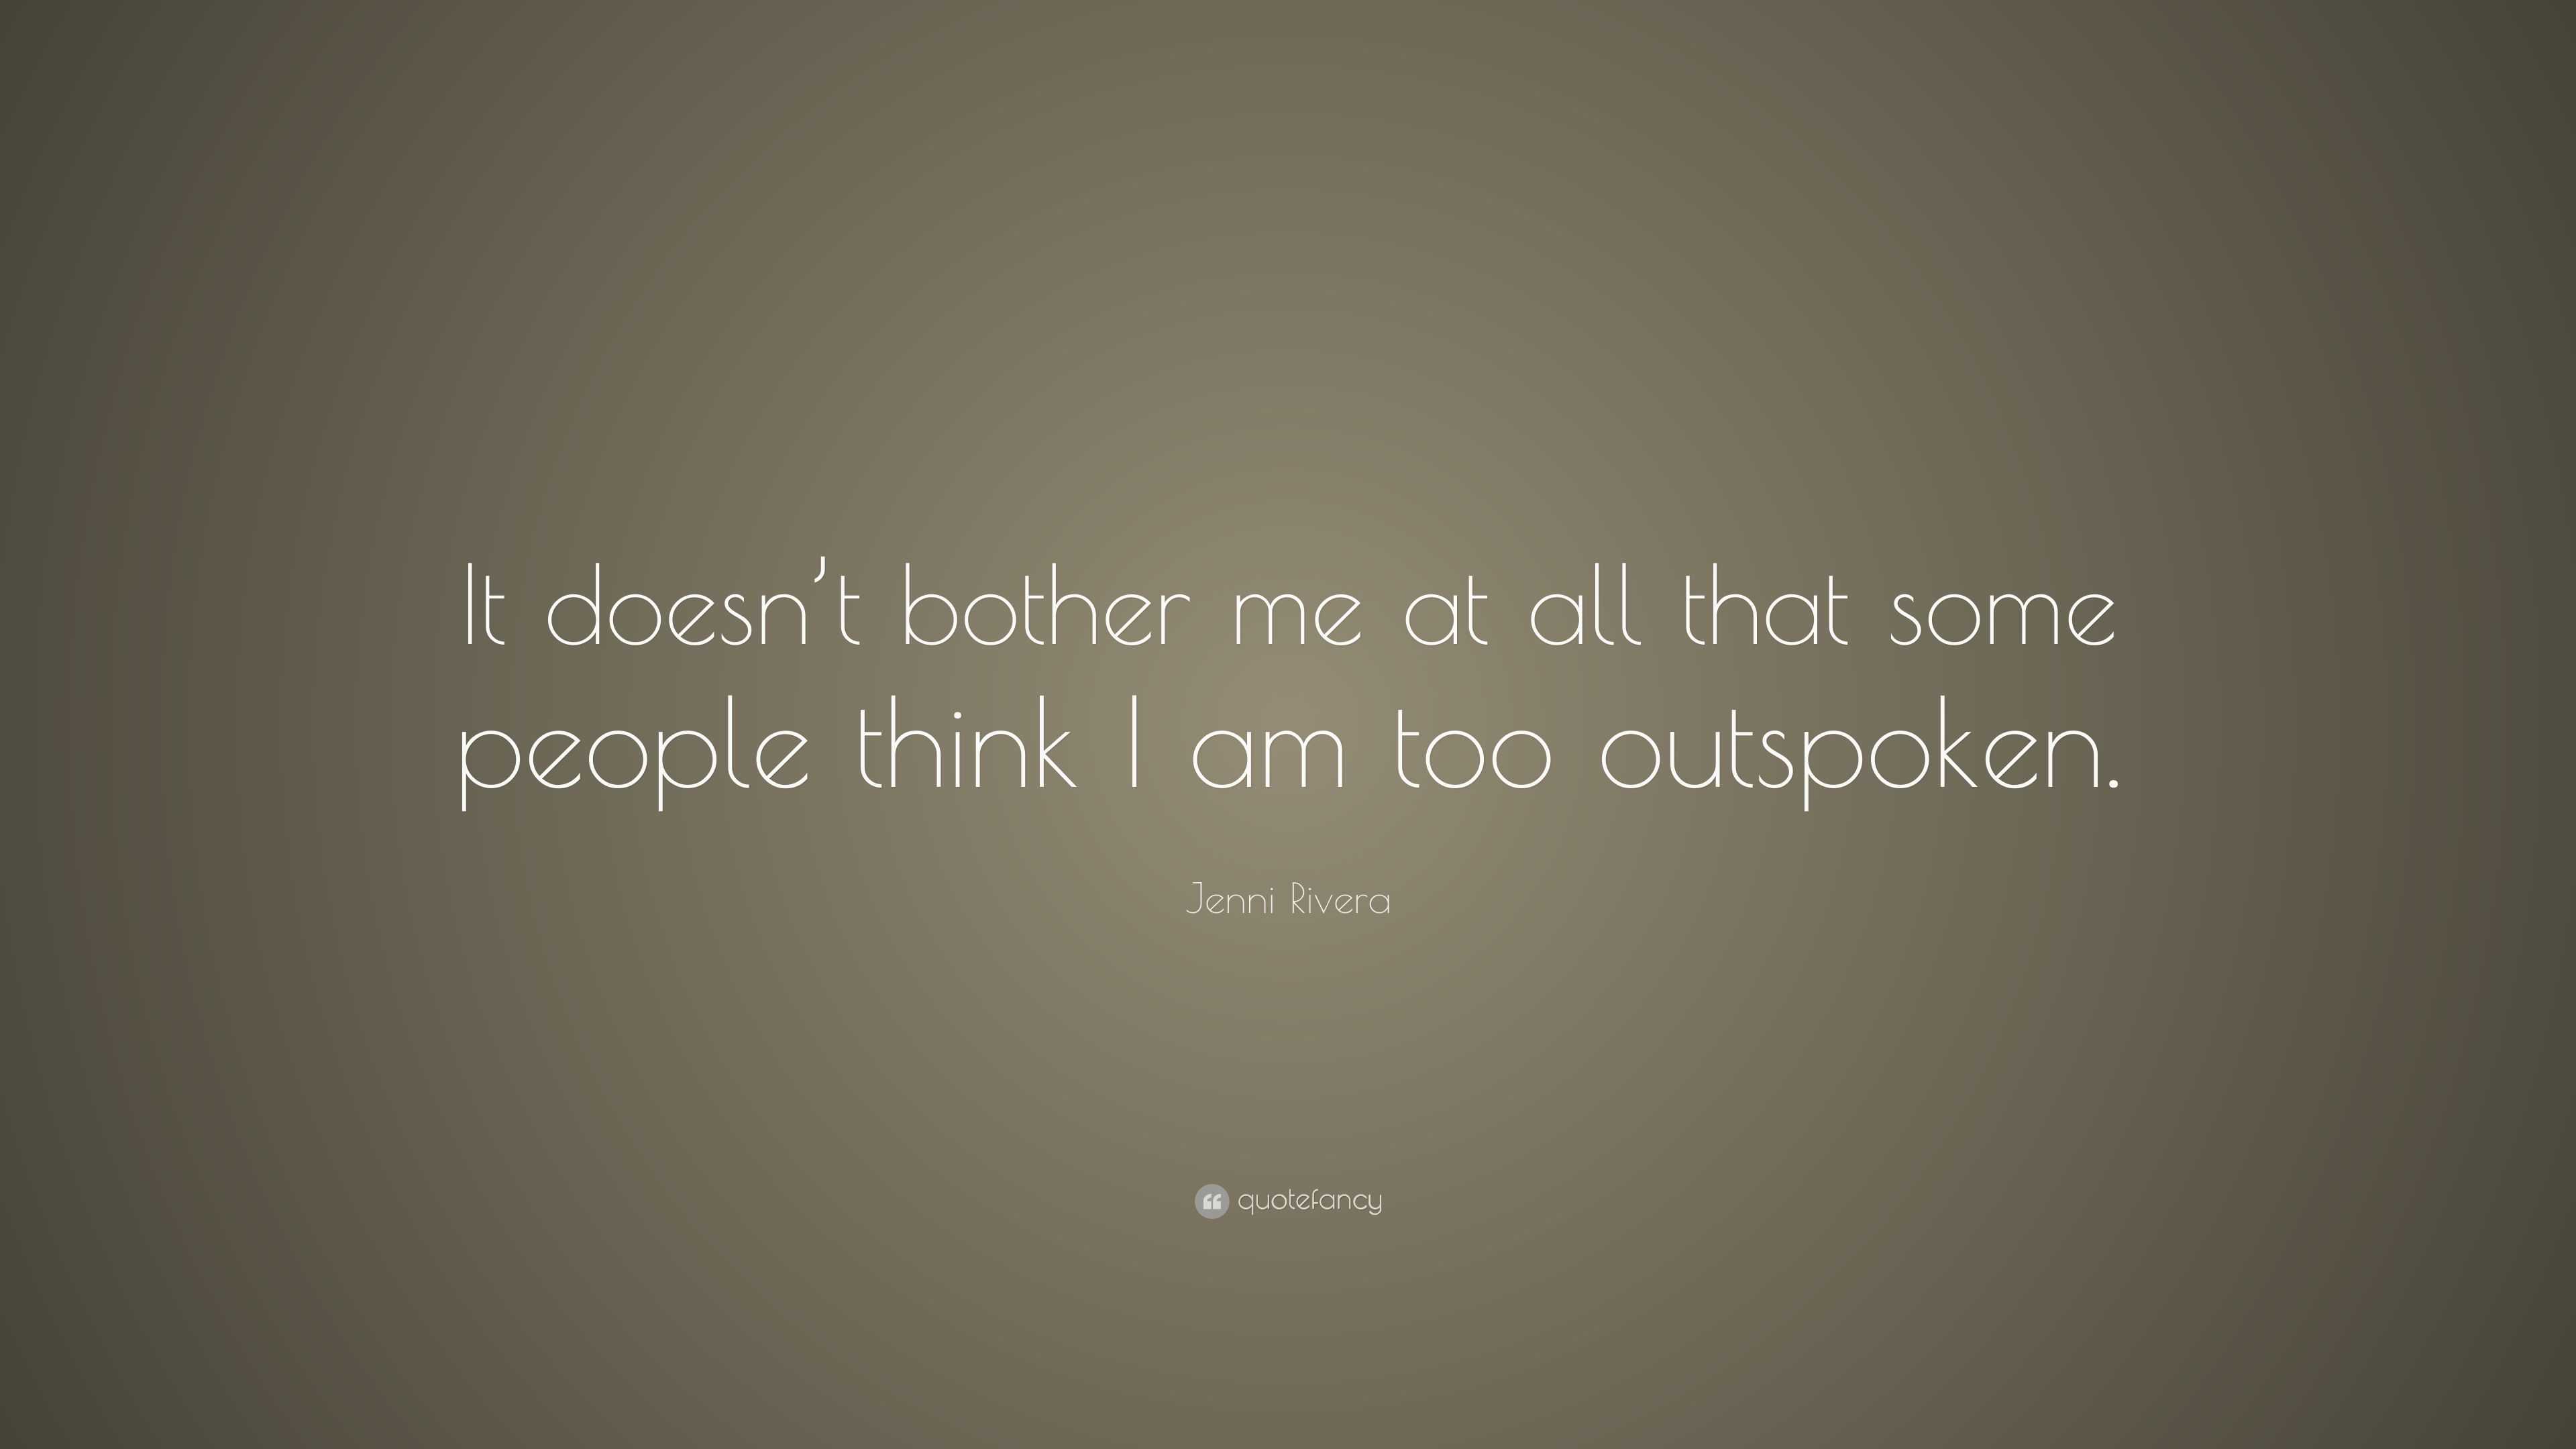 Jenni Rivera Quote: “It doesn’t bother me at all that some people think ...